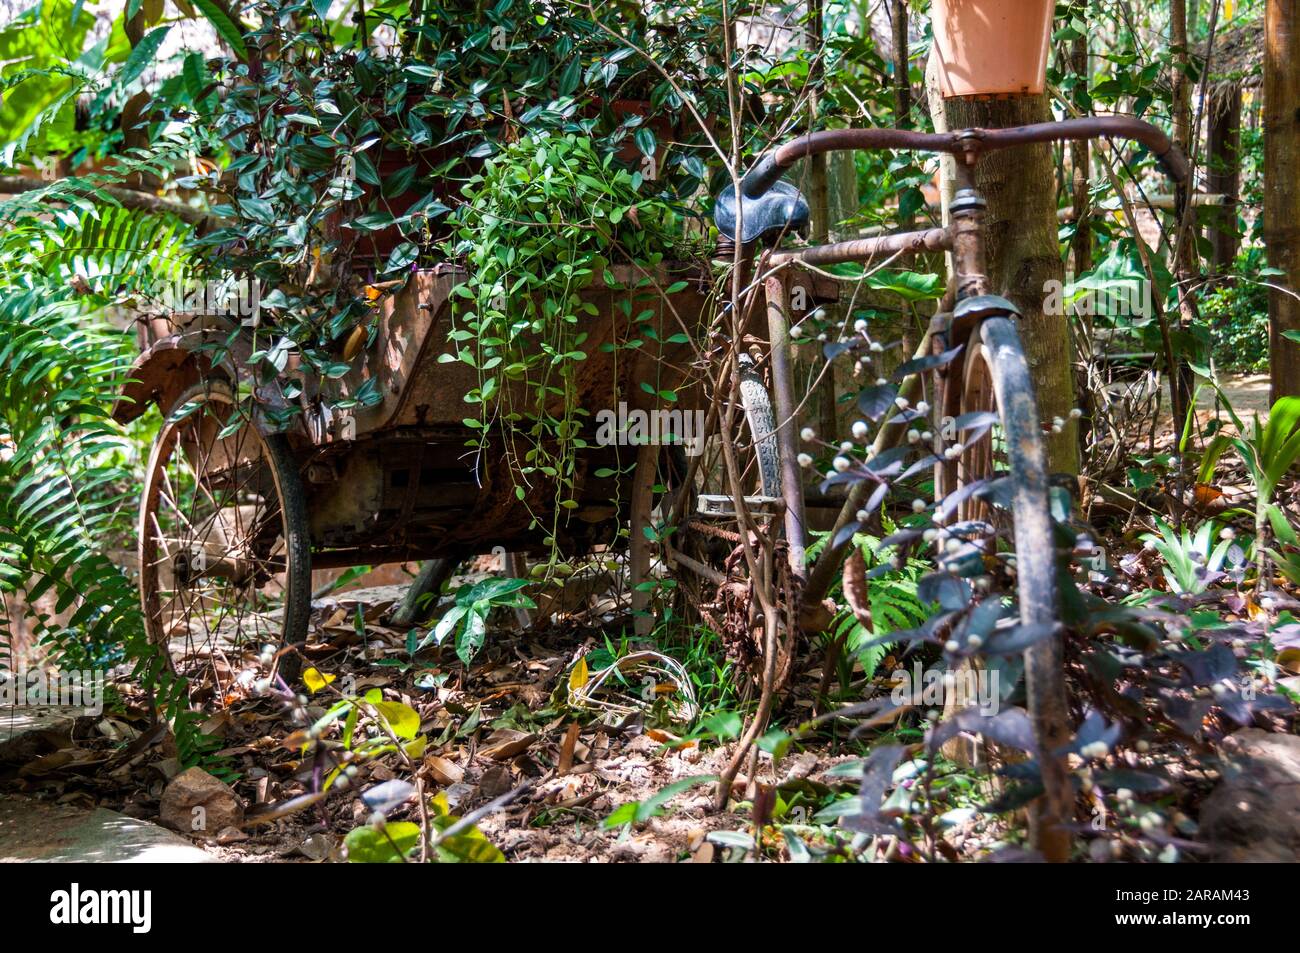 A cyclo succumbs to the encroaching jungle plants in Kep, Cambodia. Stock Photo